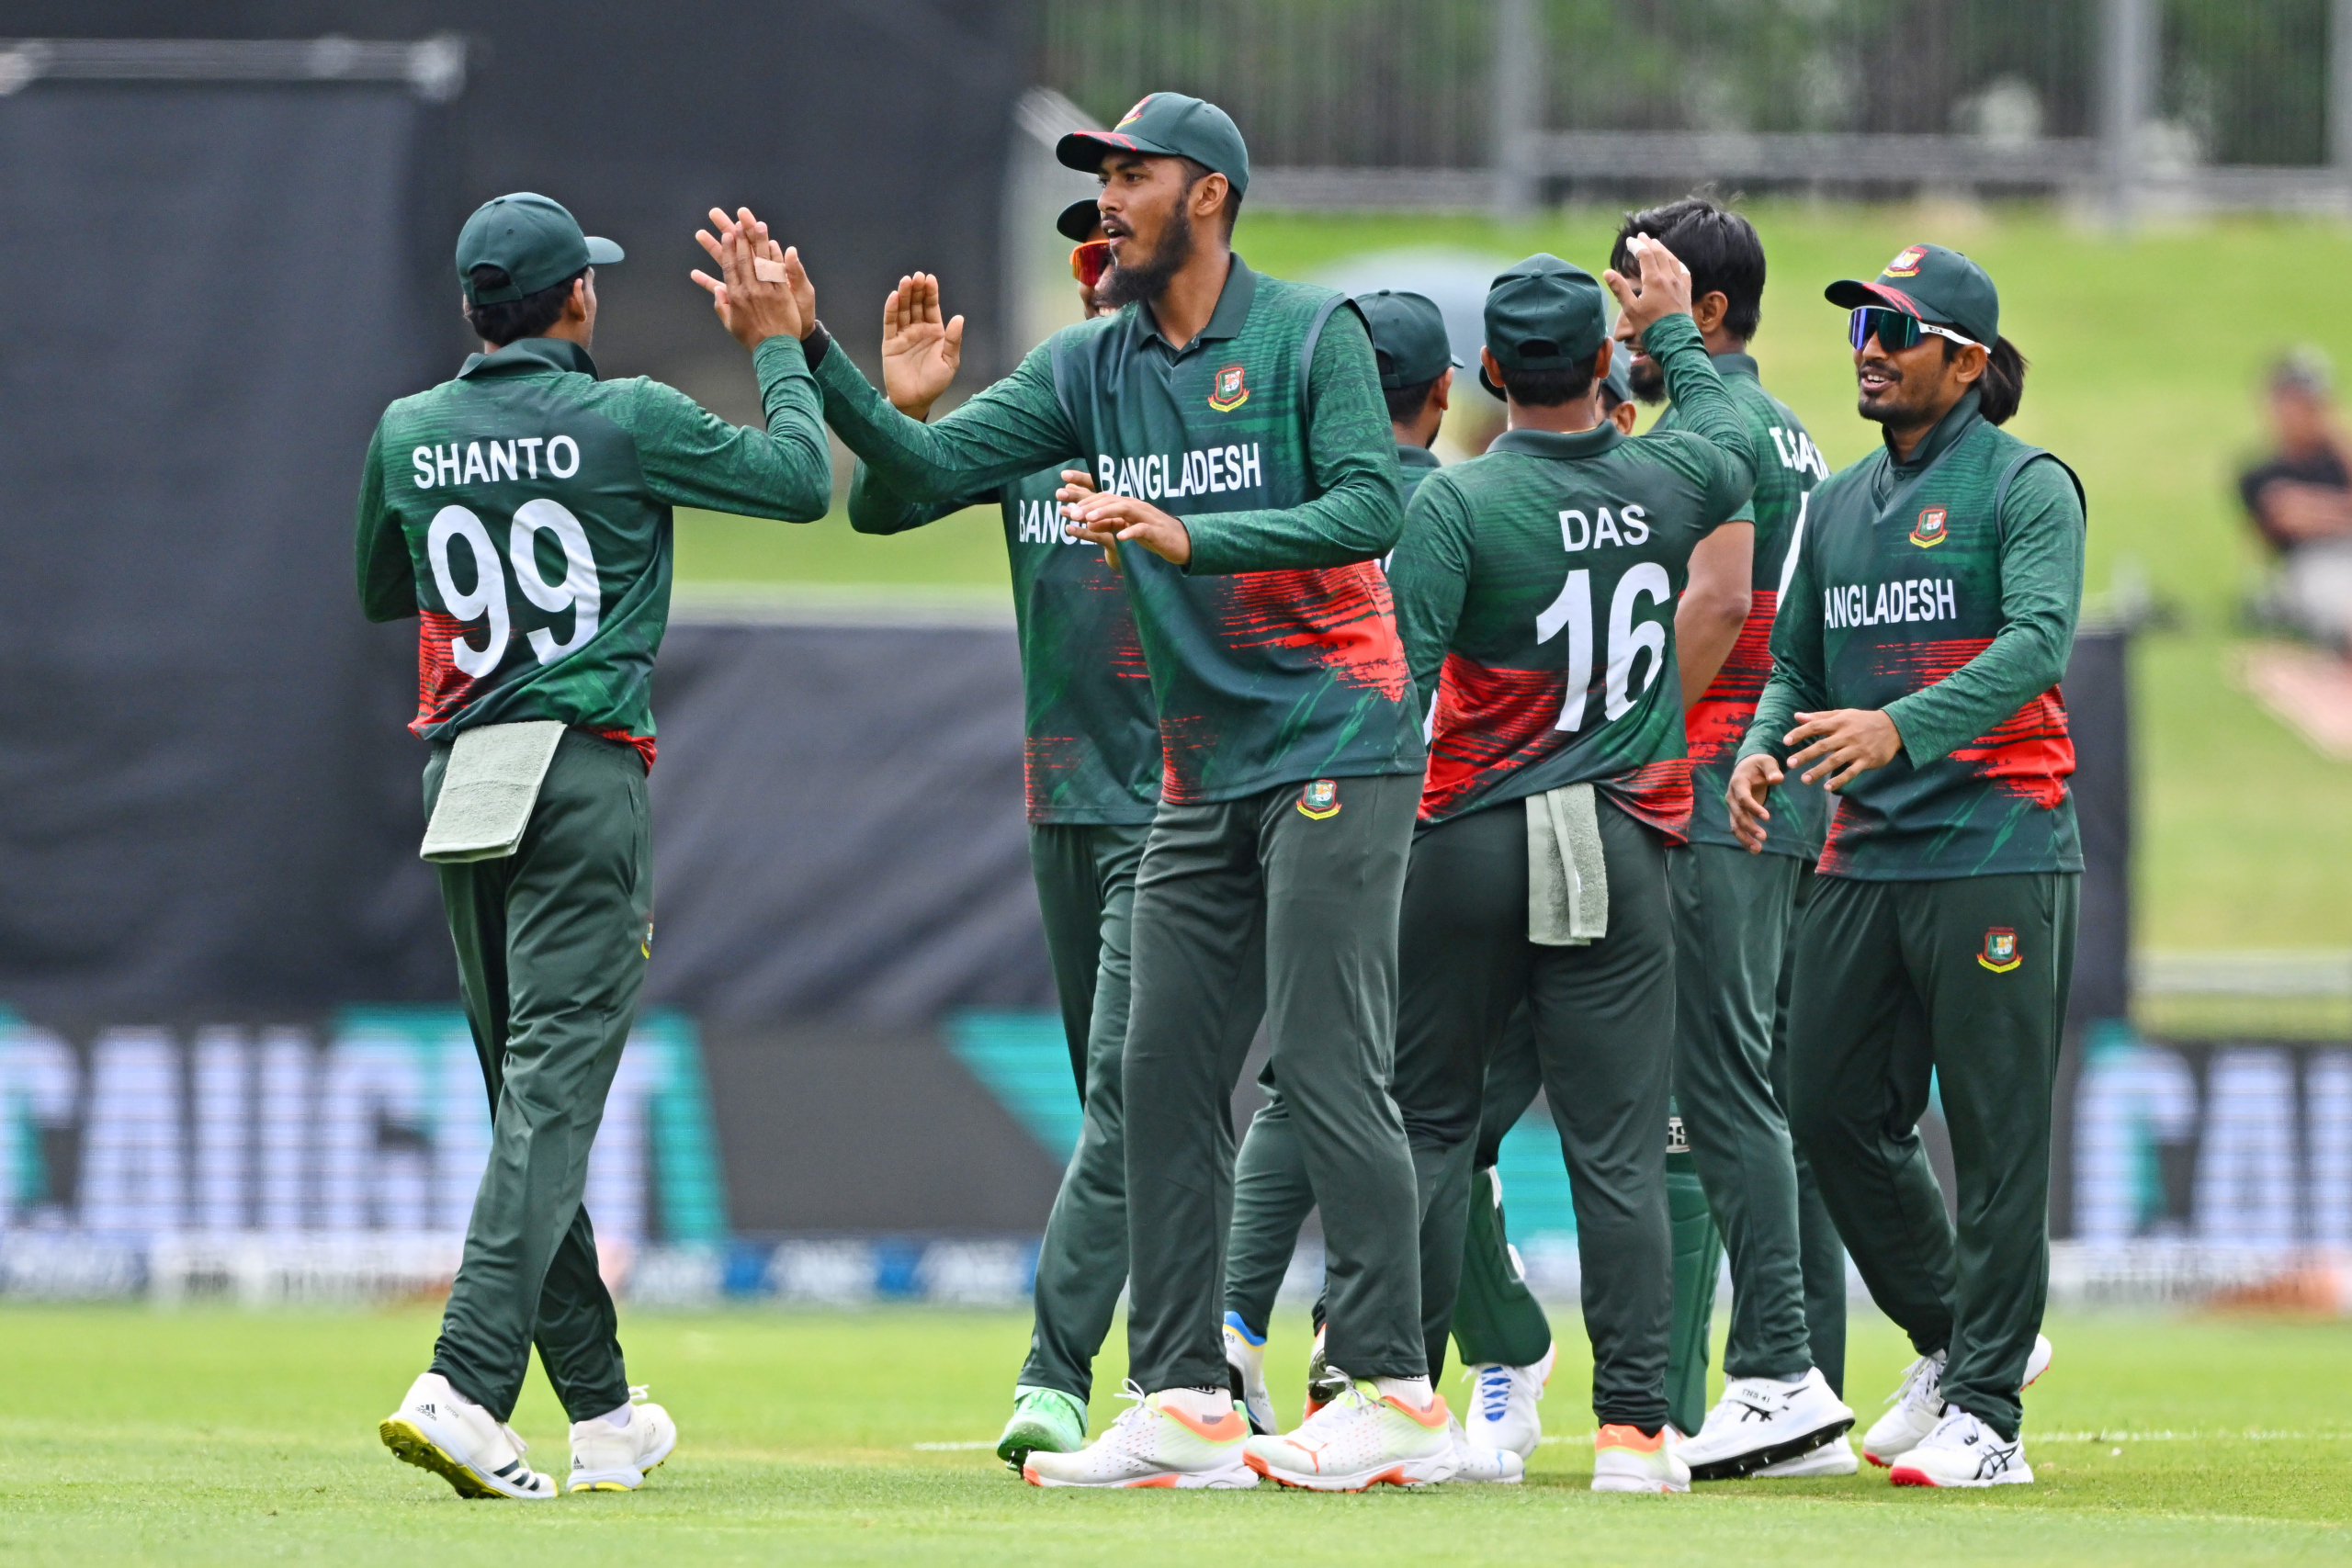 Bangladesh's Historic 9-Wicket Win Over New Zealand ODI Turnaround at McLean Park